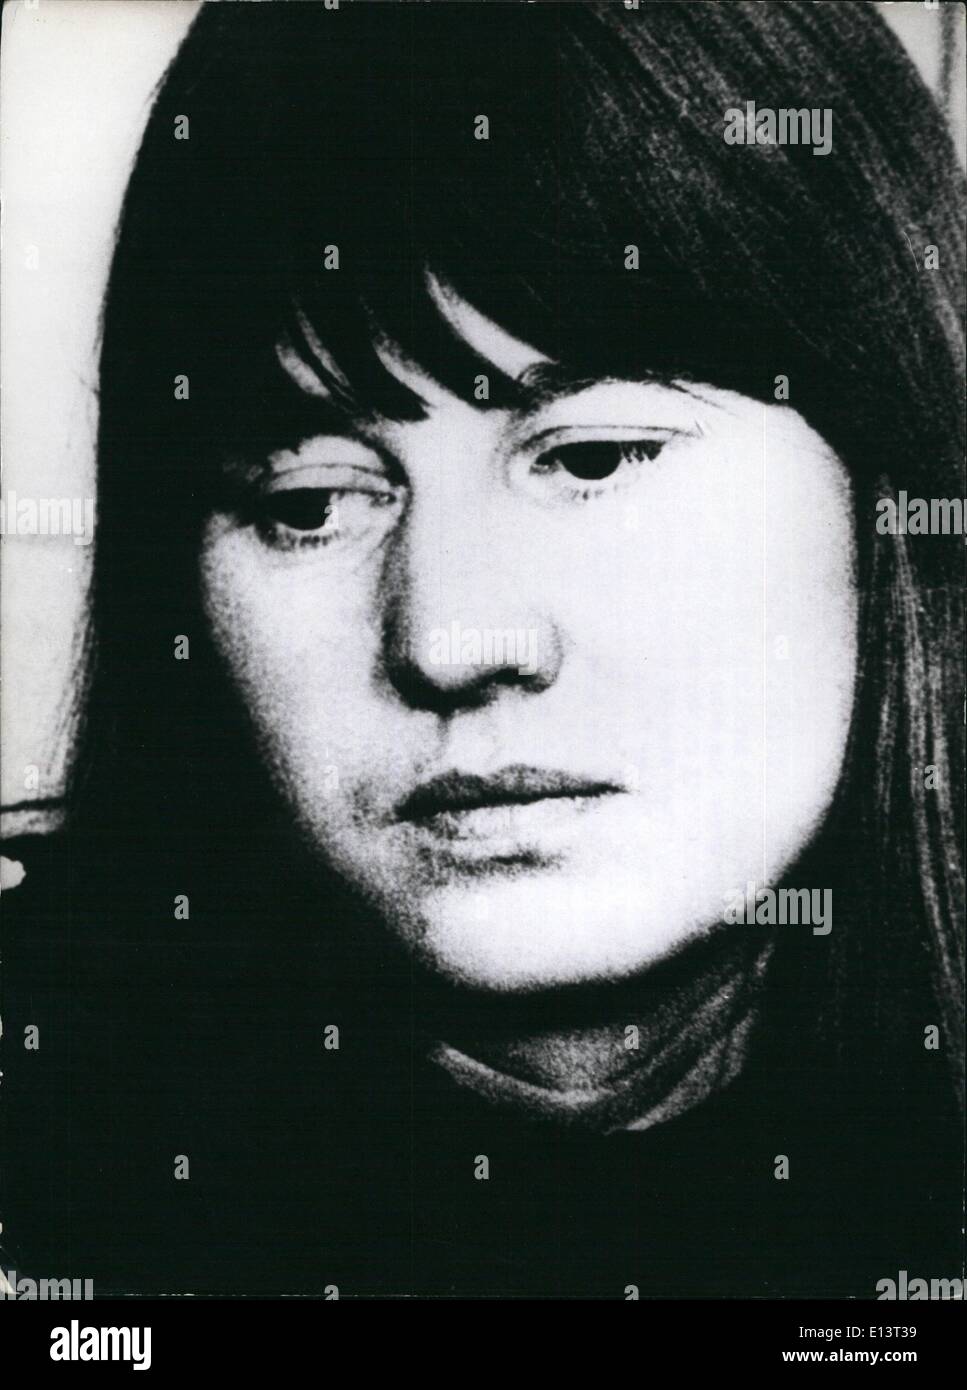 Mar. 27, 2012 - Ulrike Meinhof committed suicide in Prison: Almost one year after the beginning of the trial against leading members of the anarchist ''Beader/Meinhof group'', another member of the group has died in custody. Ulrike Meinhof (41-picture) was found dead on May 9th in her cell of the Stuttgart Stammheim prison, after she had hanged herself with a towel. On November 9th 1974, Holger Meins, also one of the leaders of the group, had died while being on hunger strike. Ulrike Meinhof was born on October 7th 1934 in Oldenburg (North Germany) Stock Photo